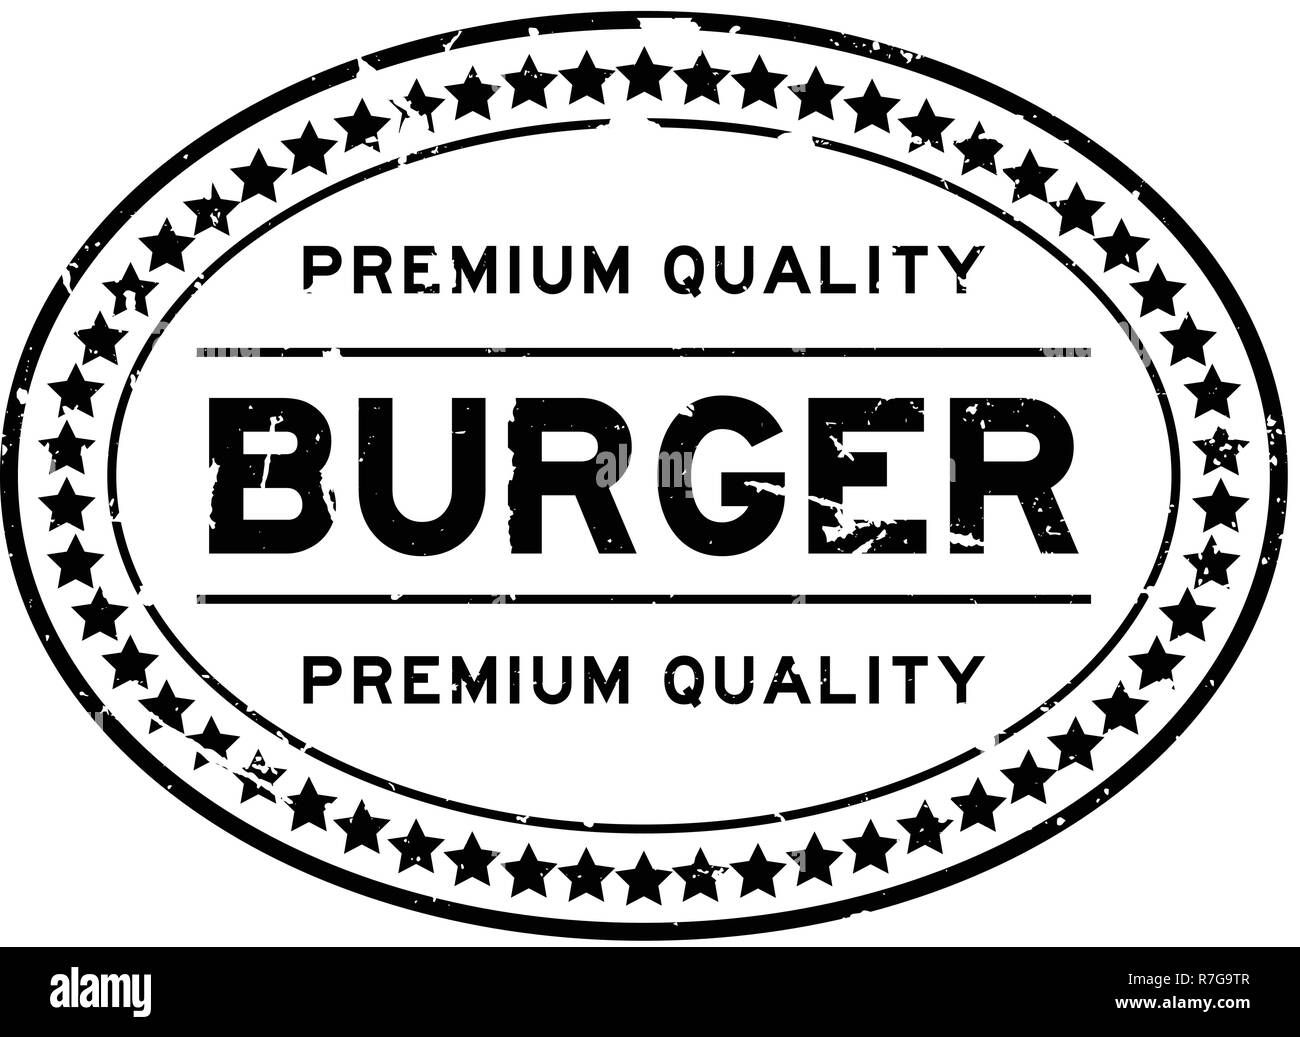 Grunge black premium quality burger oval rubber seal stamp on white background Stock Vector